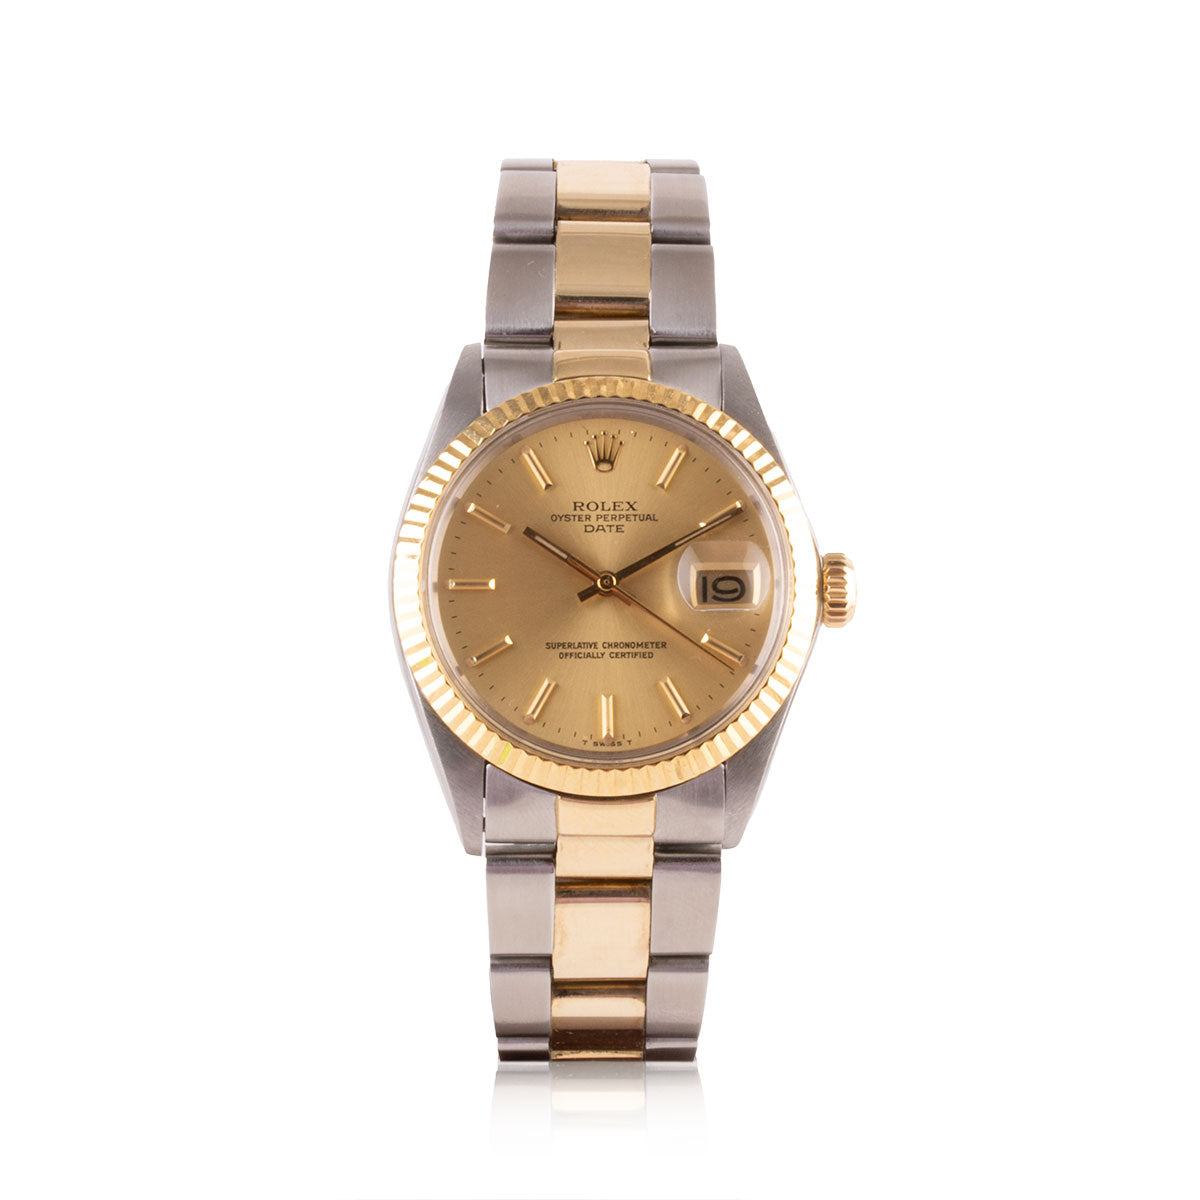 Second-hand watch - Rolex - Oyster Perpetual - 5650€